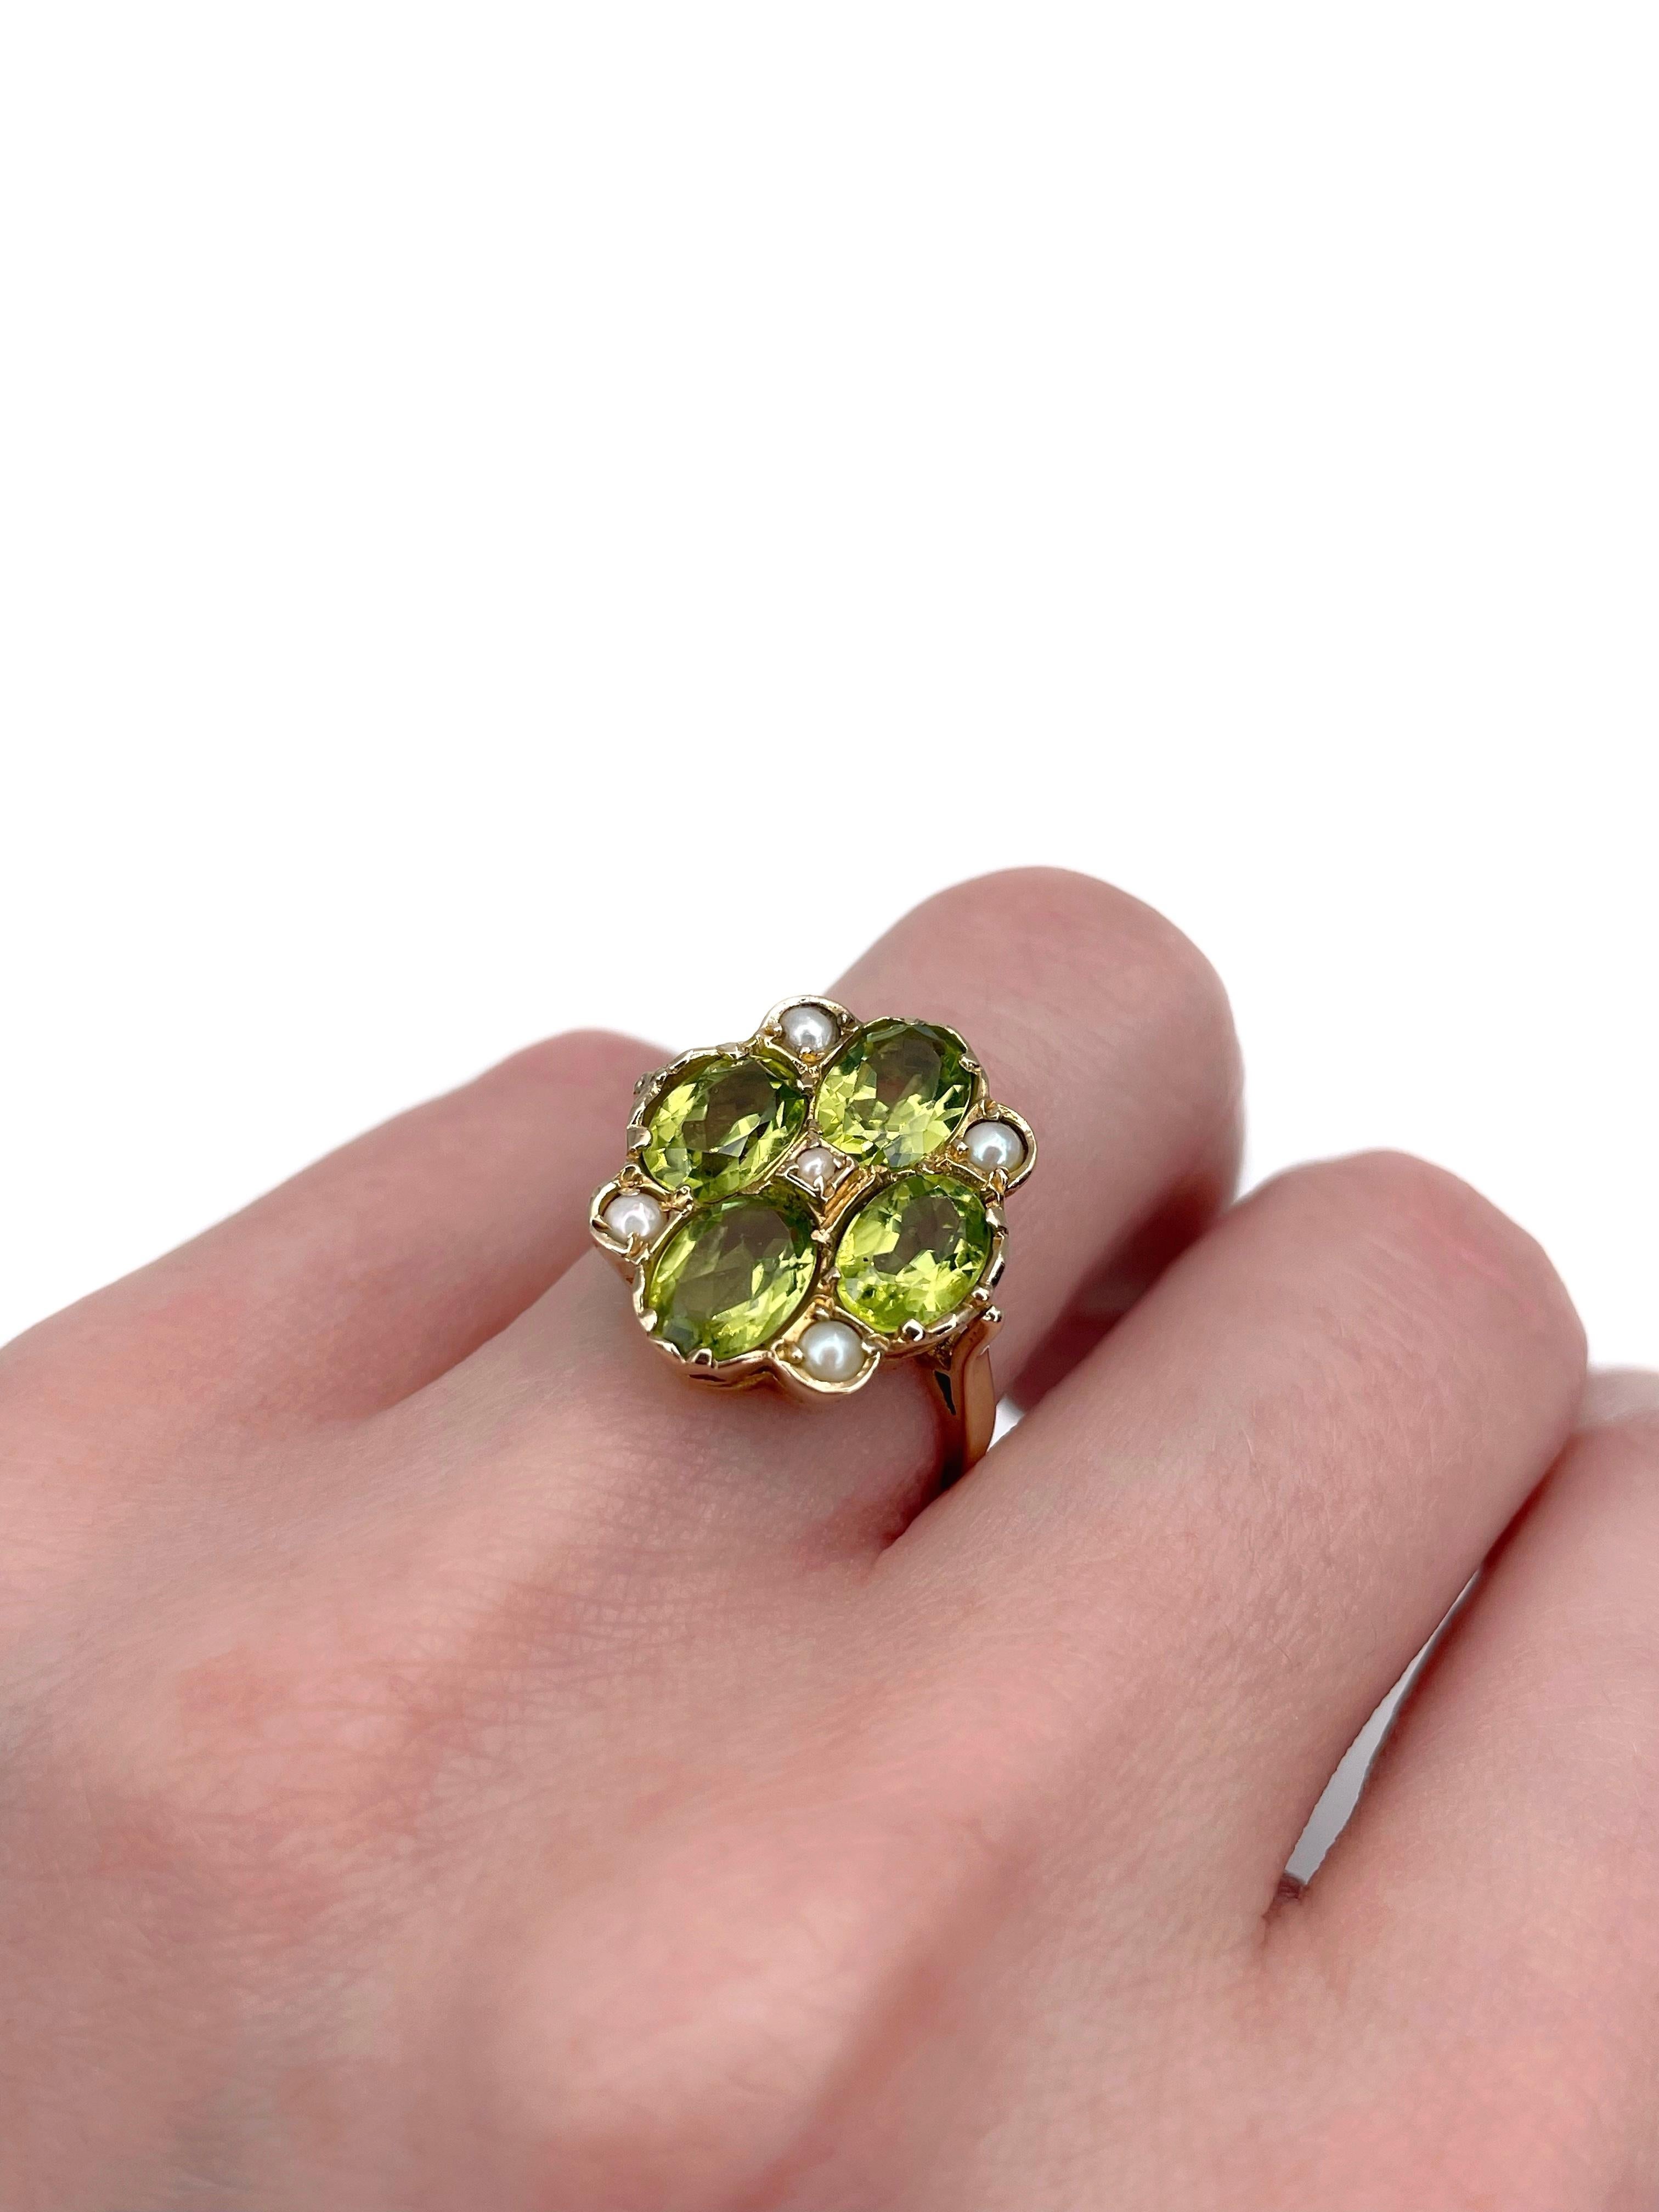 This is a Mid Century cocktail ring crafted in 9K yellow gold. Circa 1950. 

The piece features:
- 4 peridots (oval cut)
- 5 seed pearls

Weight: 4.58g
Size: 15.75 (US 5)

IMPORTANT: please ask about the possibility to resize before purchase. This